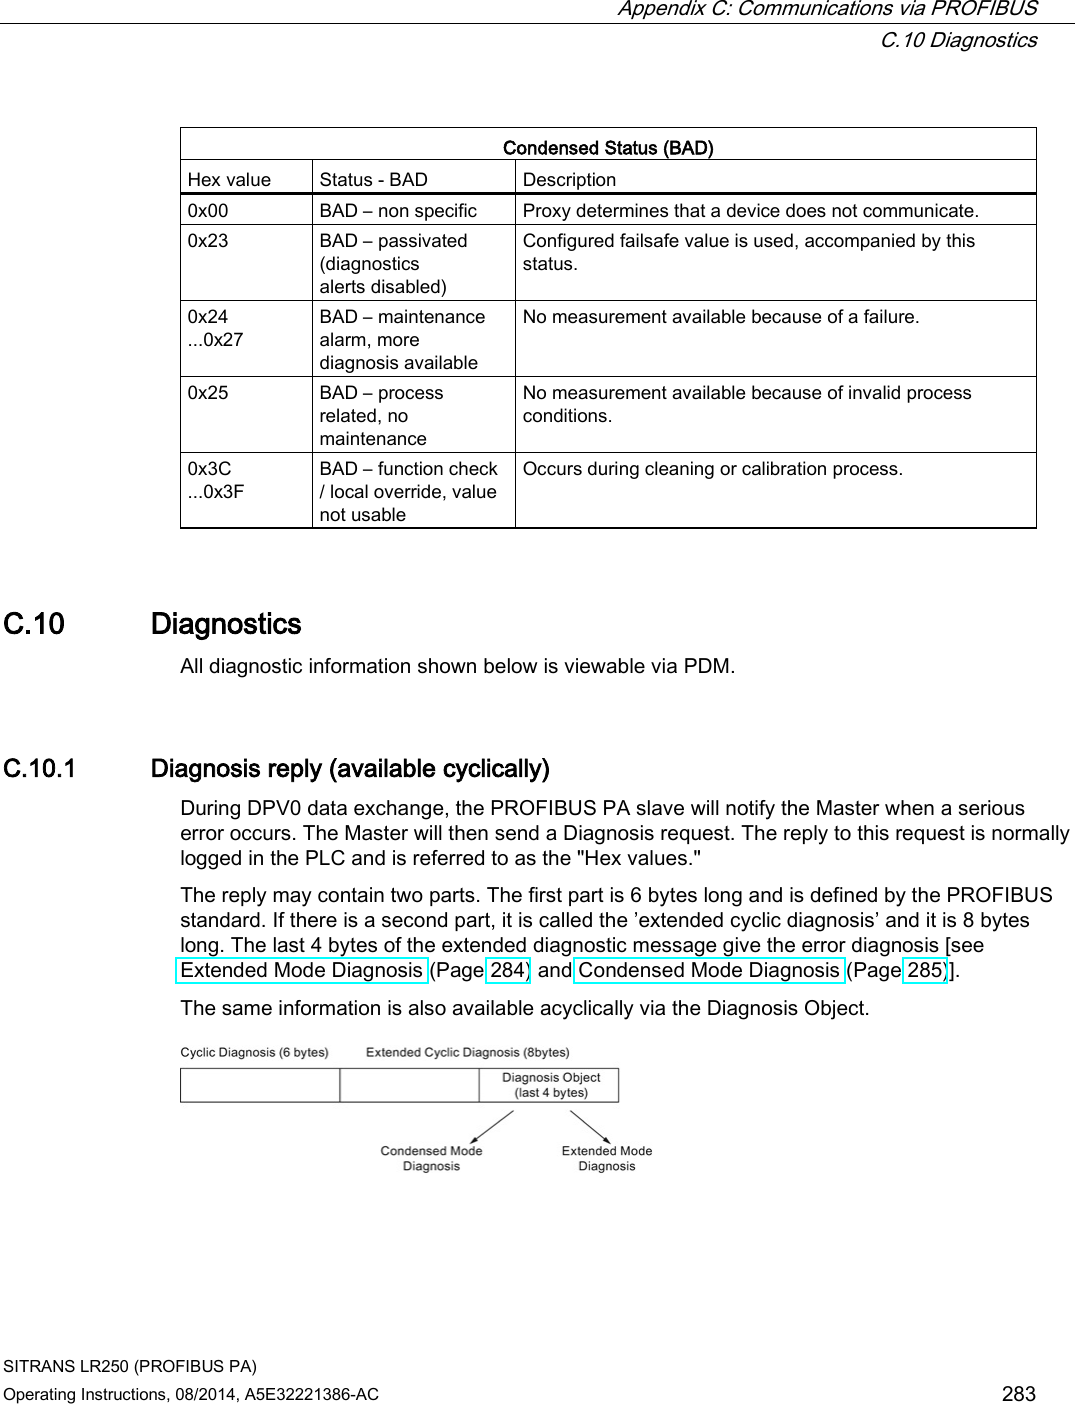  Appendix C: Communications via PROFIBUS  C.10 Diagnostics SITRANS LR250 (PROFIBUS PA) Operating Instructions, 08/2014, A5E32221386-AC 283  Condensed Status (BAD) Hex value Status - BAD Description 0x00  BAD – non specific Proxy determines that a device does not communicate. 0x23  BAD – passivated (diagnostics alerts disabled) Configured failsafe value is used, accompanied by this status. 0x24 ...0x27 BAD – maintenance alarm, more diagnosis available No measurement available because of a failure. 0x25  BAD – process related, no maintenance No measurement available because of invalid process conditions. 0x3C ...0x3F BAD – function check / local override, value not usable Occurs during cleaning or calibration process. C.10 Diagnostics All diagnostic information shown below is viewable via PDM. C.10.1 Diagnosis reply (available cyclically) During DPV0 data exchange, the PROFIBUS PA slave will notify the Master when a serious error occurs. The Master will then send a Diagnosis request. The reply to this request is normally logged in the PLC and is referred to as the &quot;Hex values.&quot; The reply may contain two parts. The first part is 6 bytes long and is defined by the PROFIBUS standard. If there is a second part, it is called the ’extended cyclic diagnosis’ and it is 8 bytes long. The last 4 bytes of the extended diagnostic message give the error diagnosis [see Extended Mode Diagnosis (Page 284) and Condensed Mode Diagnosis (Page 285)]. The same information is also available acyclically via the Diagnosis Object.  